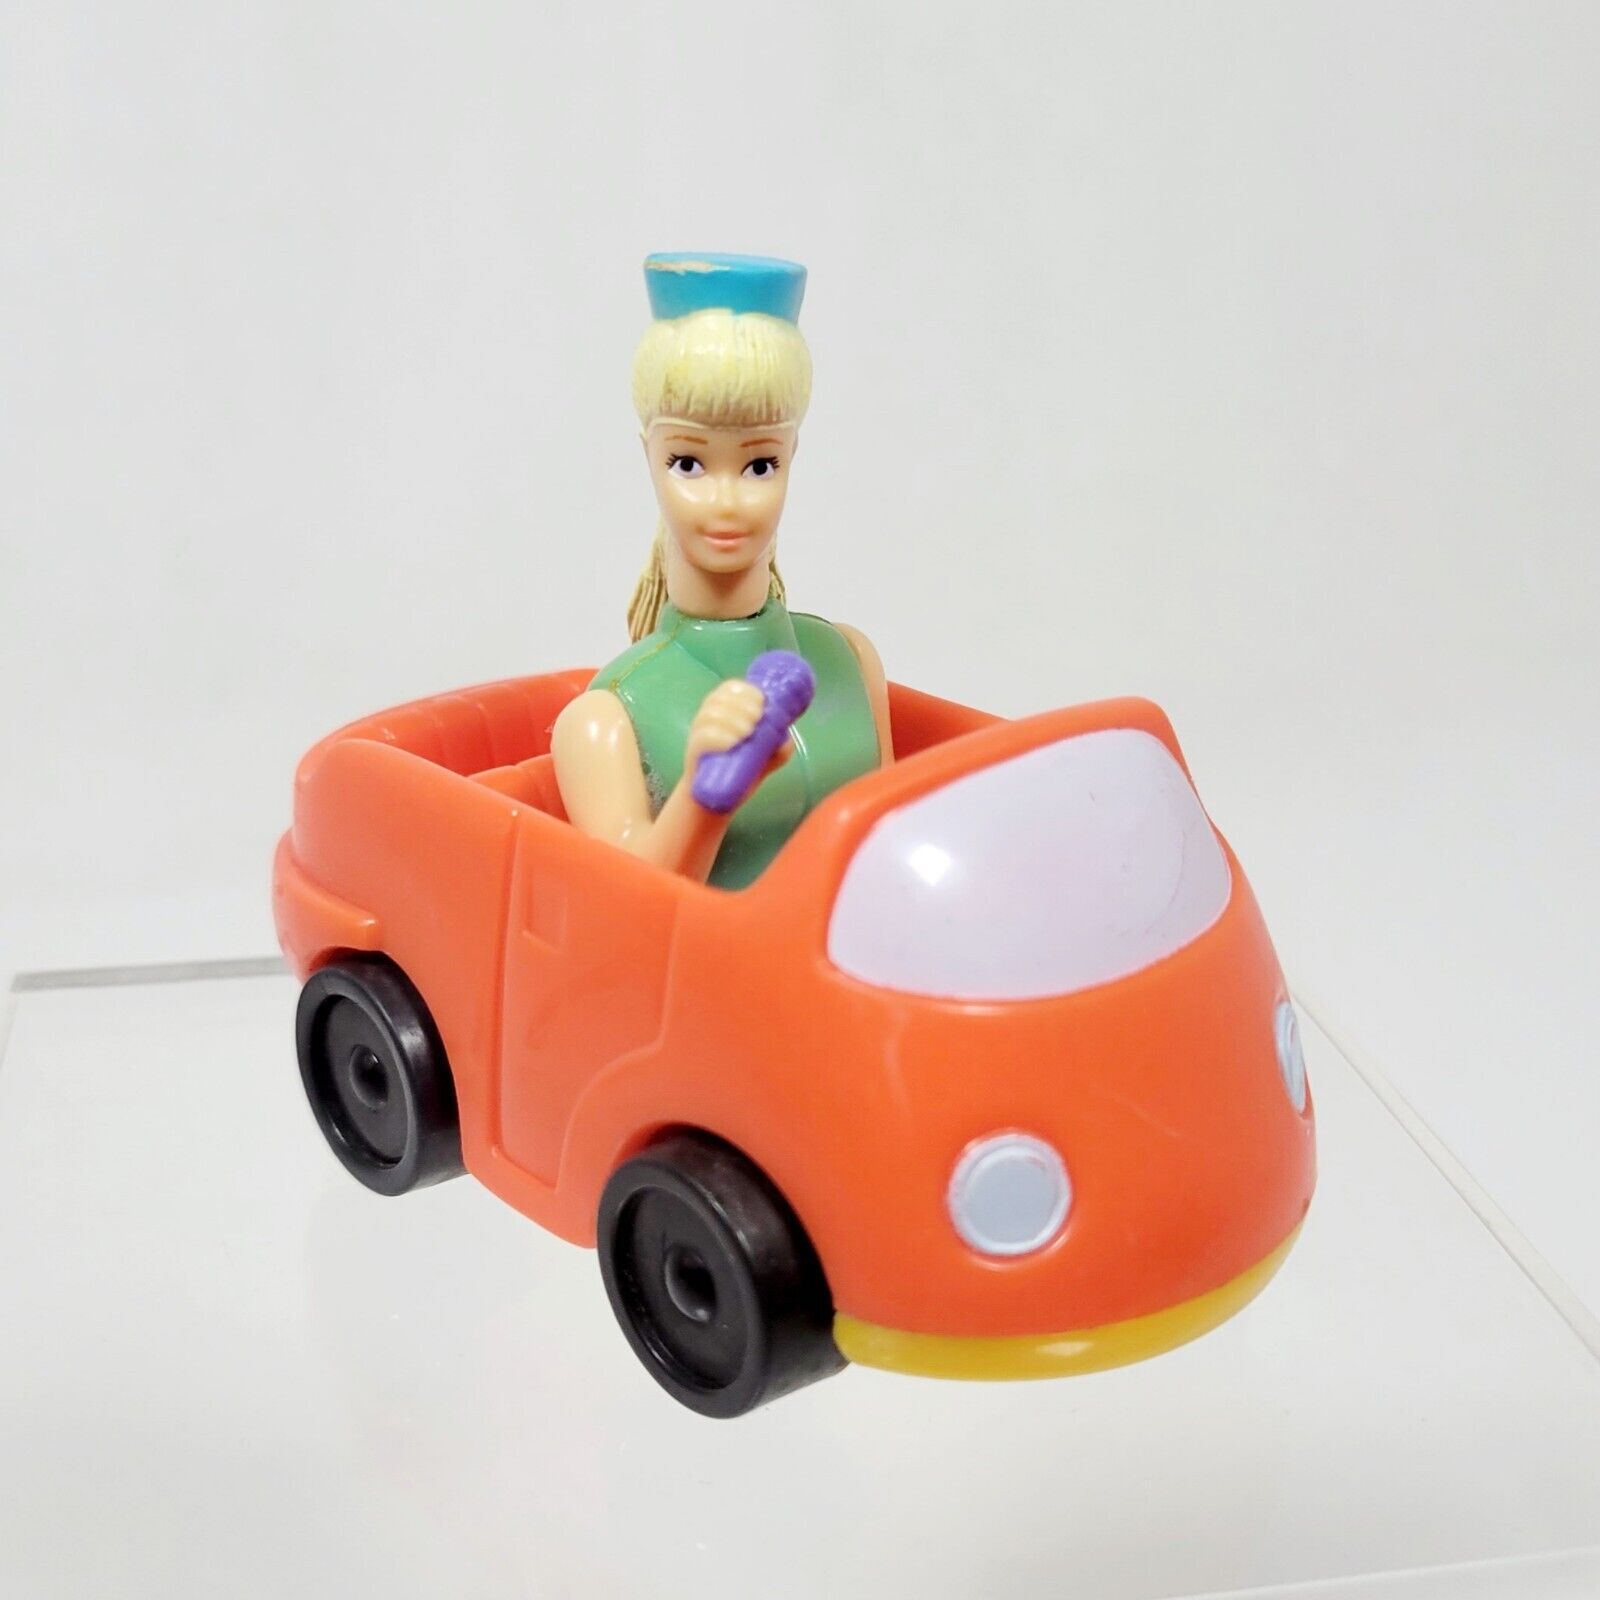 VINTAGE 1999 TOY STORY BARBIE Mattel IN CAR Orange Yellow Collectors microphone 